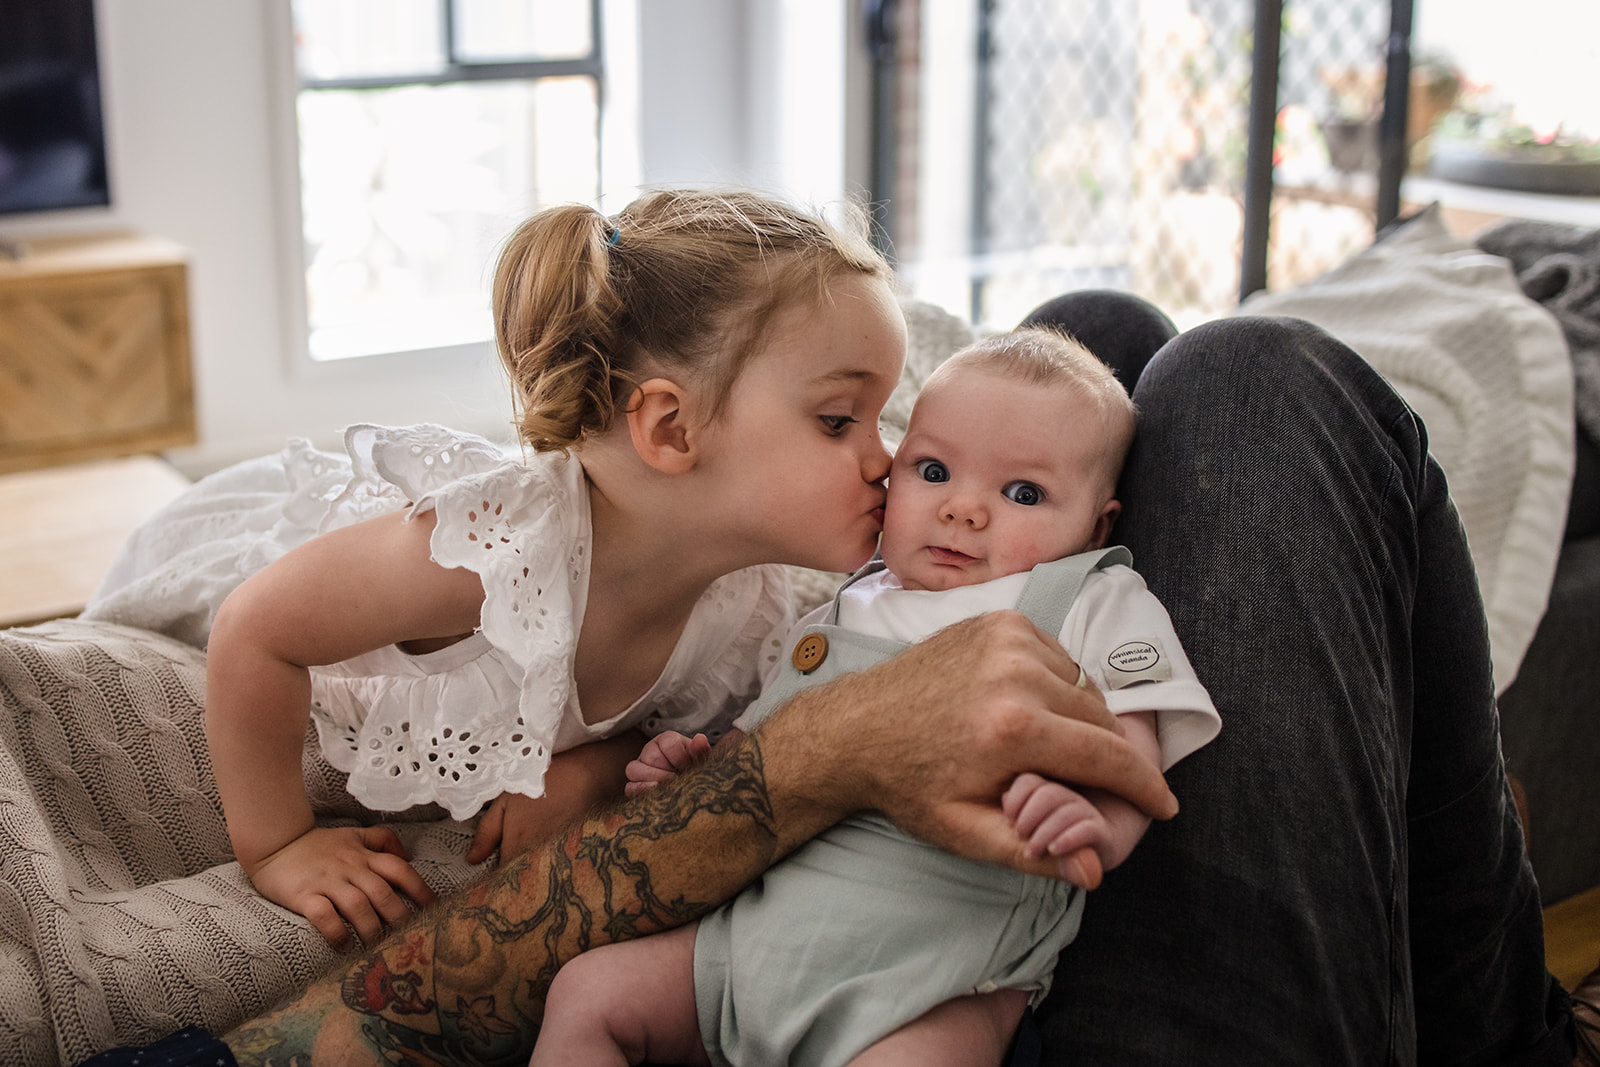 newborn baby being kissed by toddler sister